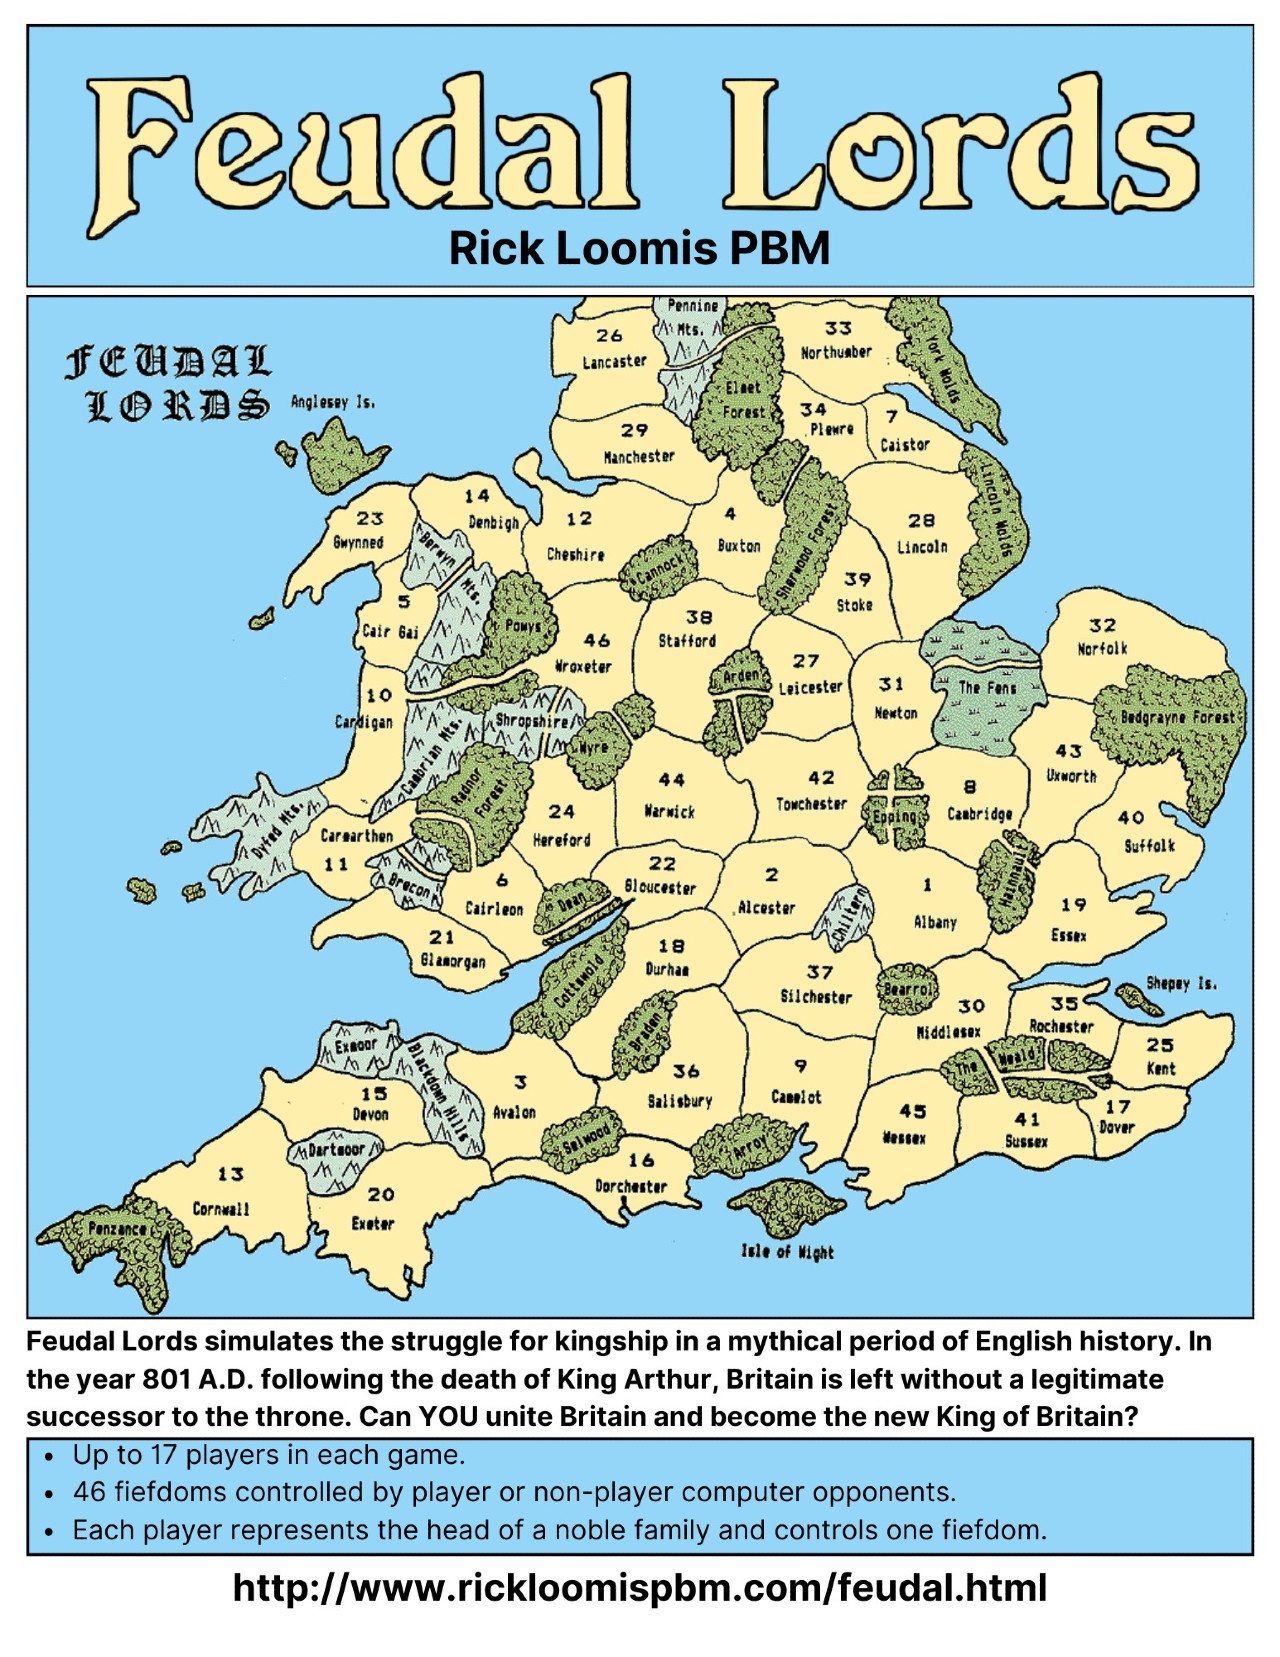 Feudal Lords image ad for RickLoomis PBM